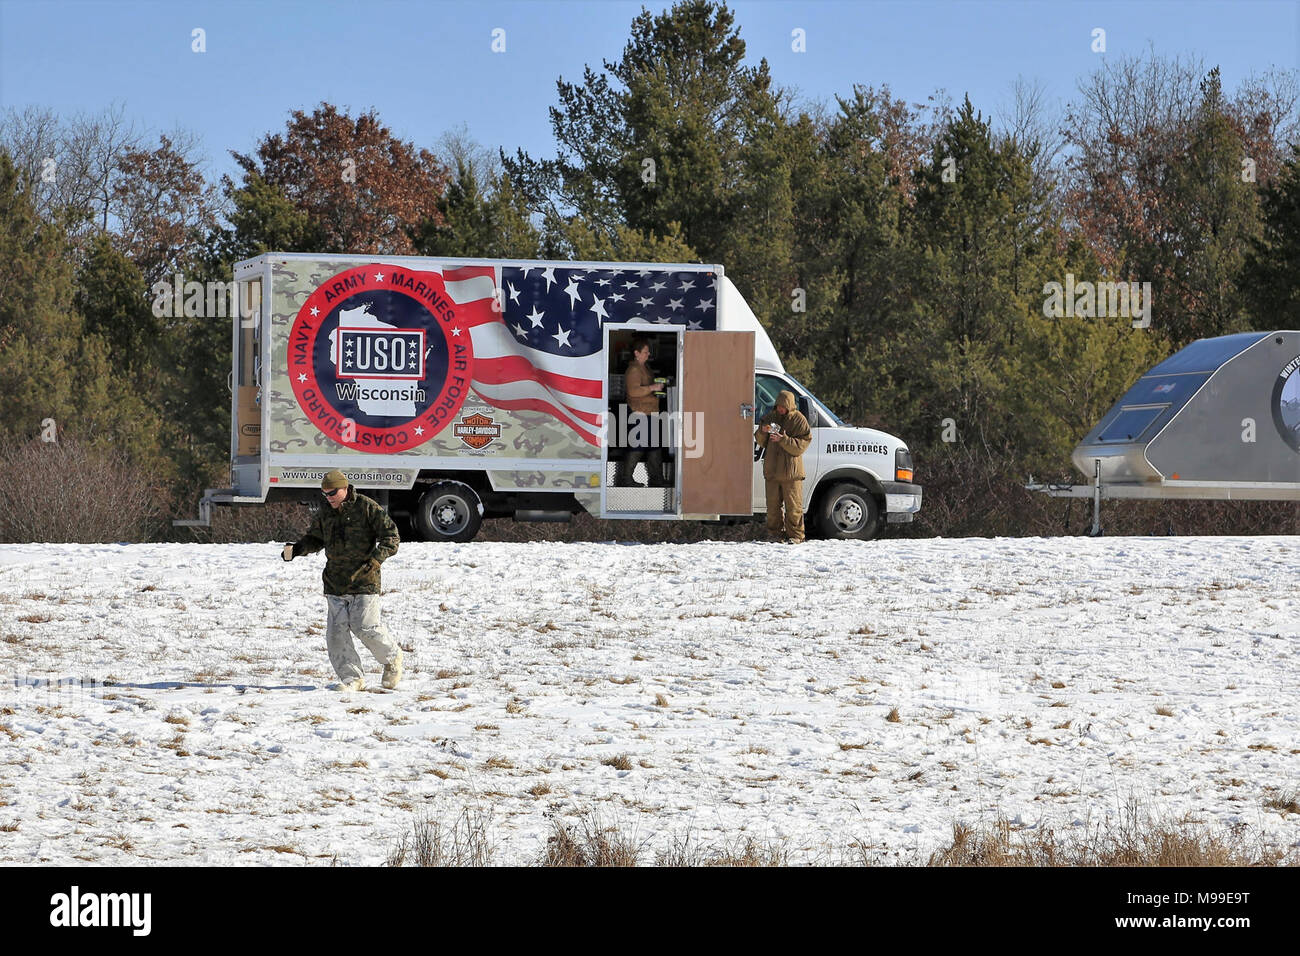 Service members at Fort McCoy, Wis., for training visit a mobile USO Wisconsin station/truck Feb. 14, 2018, on South Post at the installation. USO Wisconsin Inc. is a 501(c)(3) nonprofit organization. It currently operates six centers in Wisconsin that serve more than 25,000 military Families throughout the state. The USO has had a continuous presence in Wisconsin since 1943 through the global parent company, USO Inc. The truck is a recent new addition to USO support at the installation. (U.S. Army Stock Photo